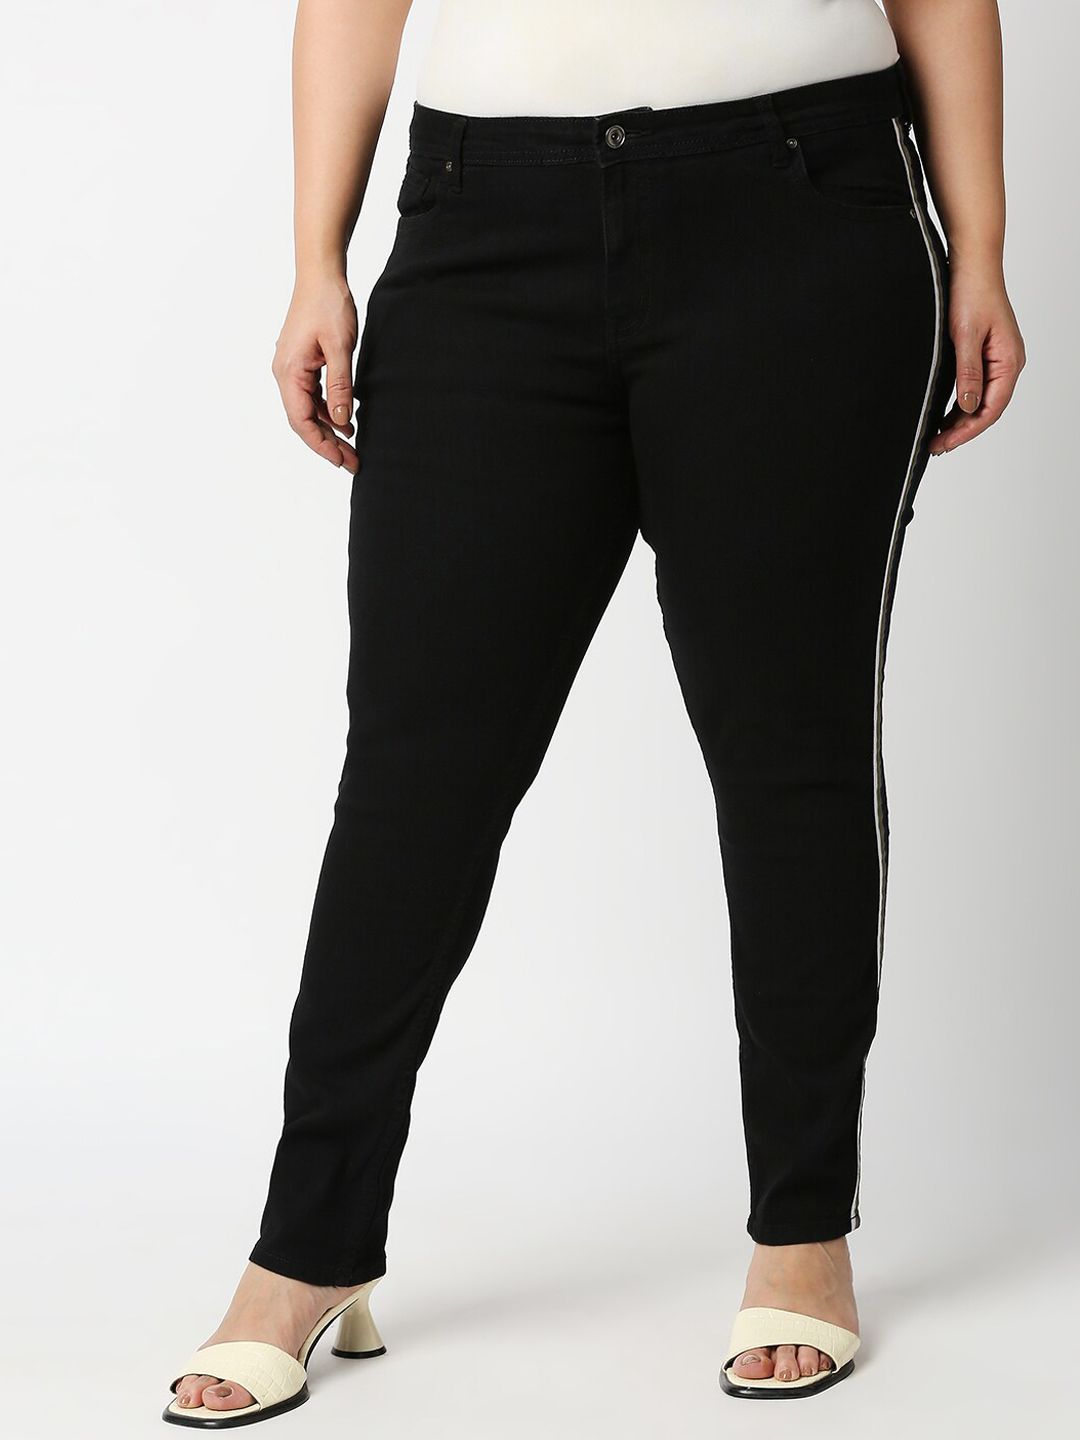 High Star Women Plus Size Black Slim Fit Stretchable Jeans Price in India